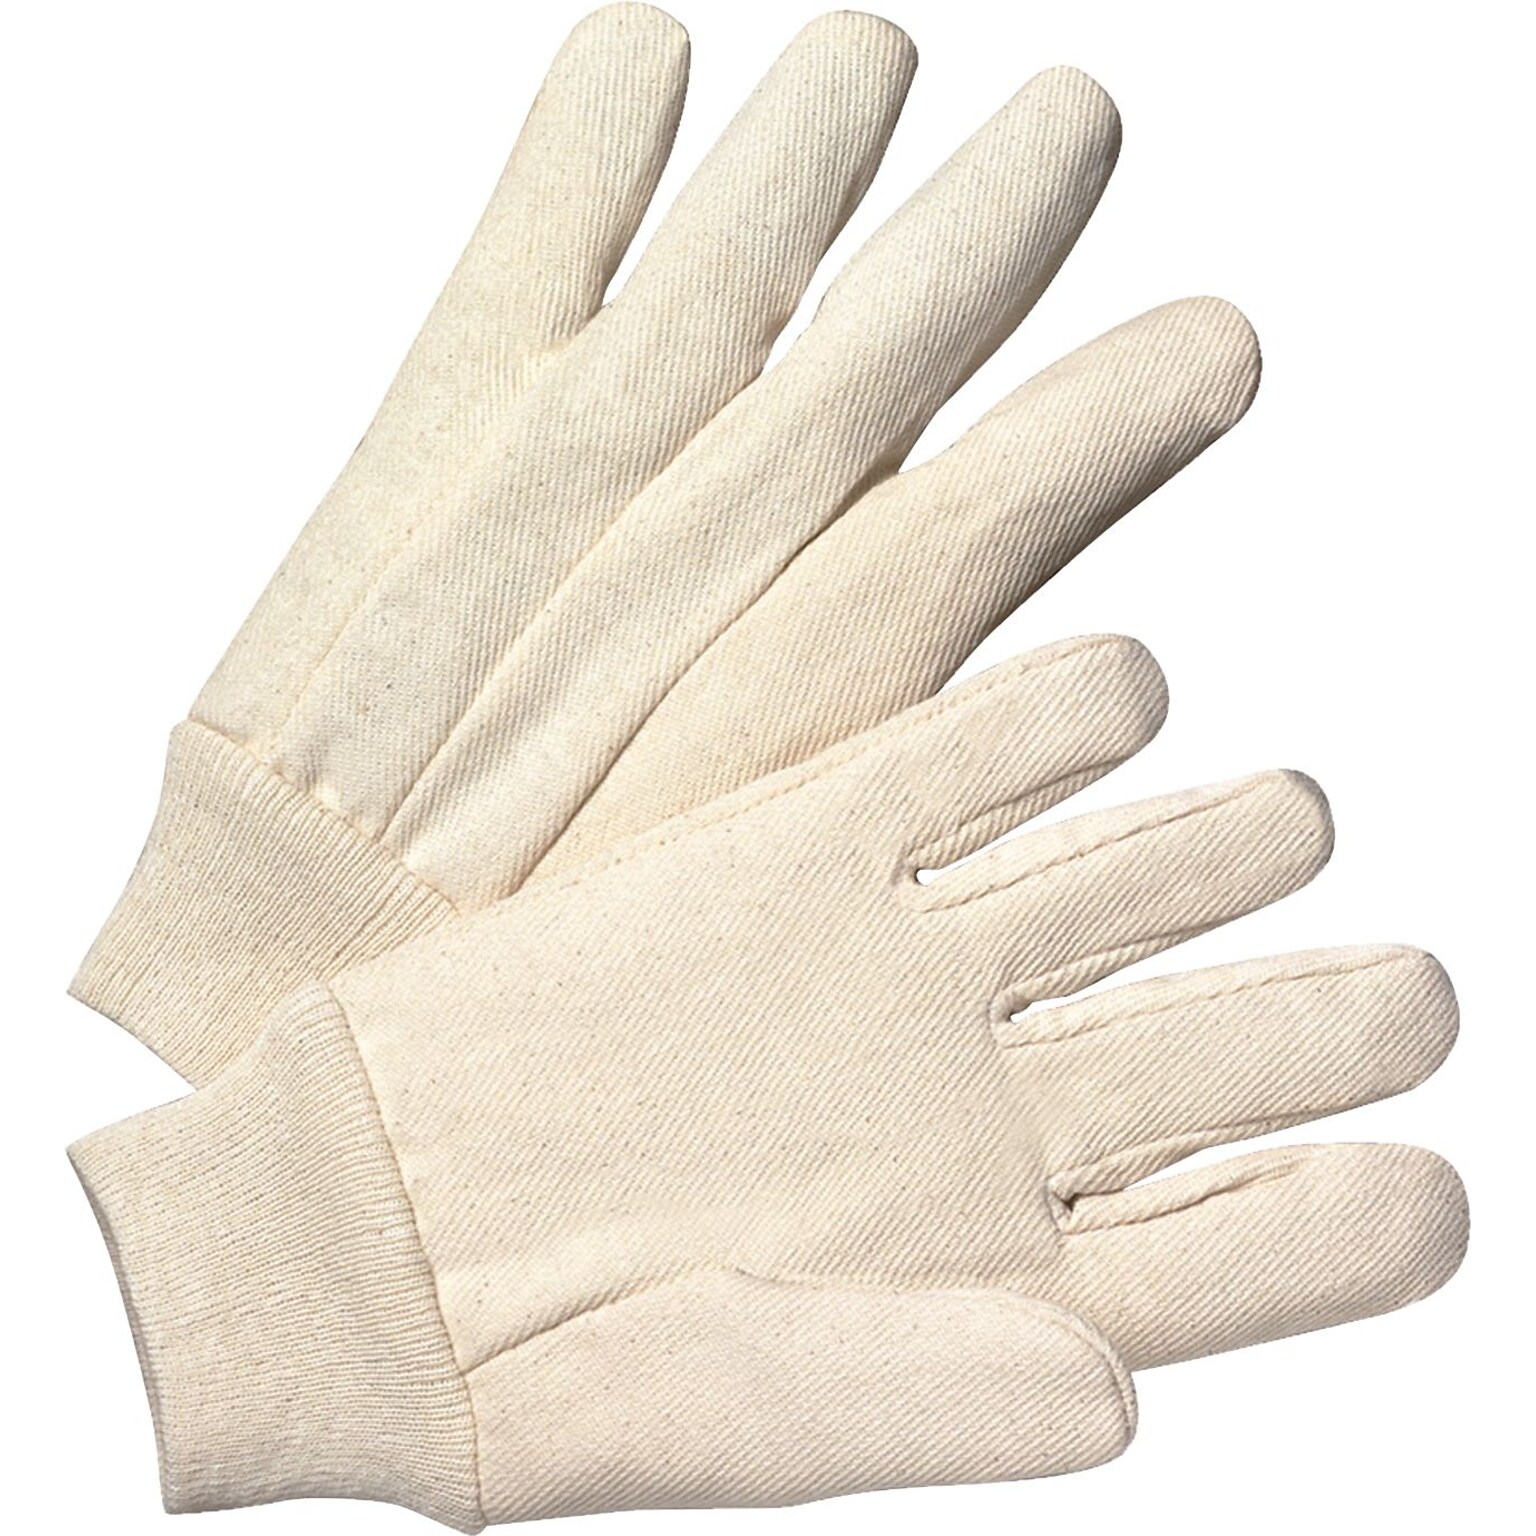 Anchor Brand Canvas Gloves, Cotton, Knit-Wrist Cuff, Mens Size, Unlined, White, 12 Pair/Box